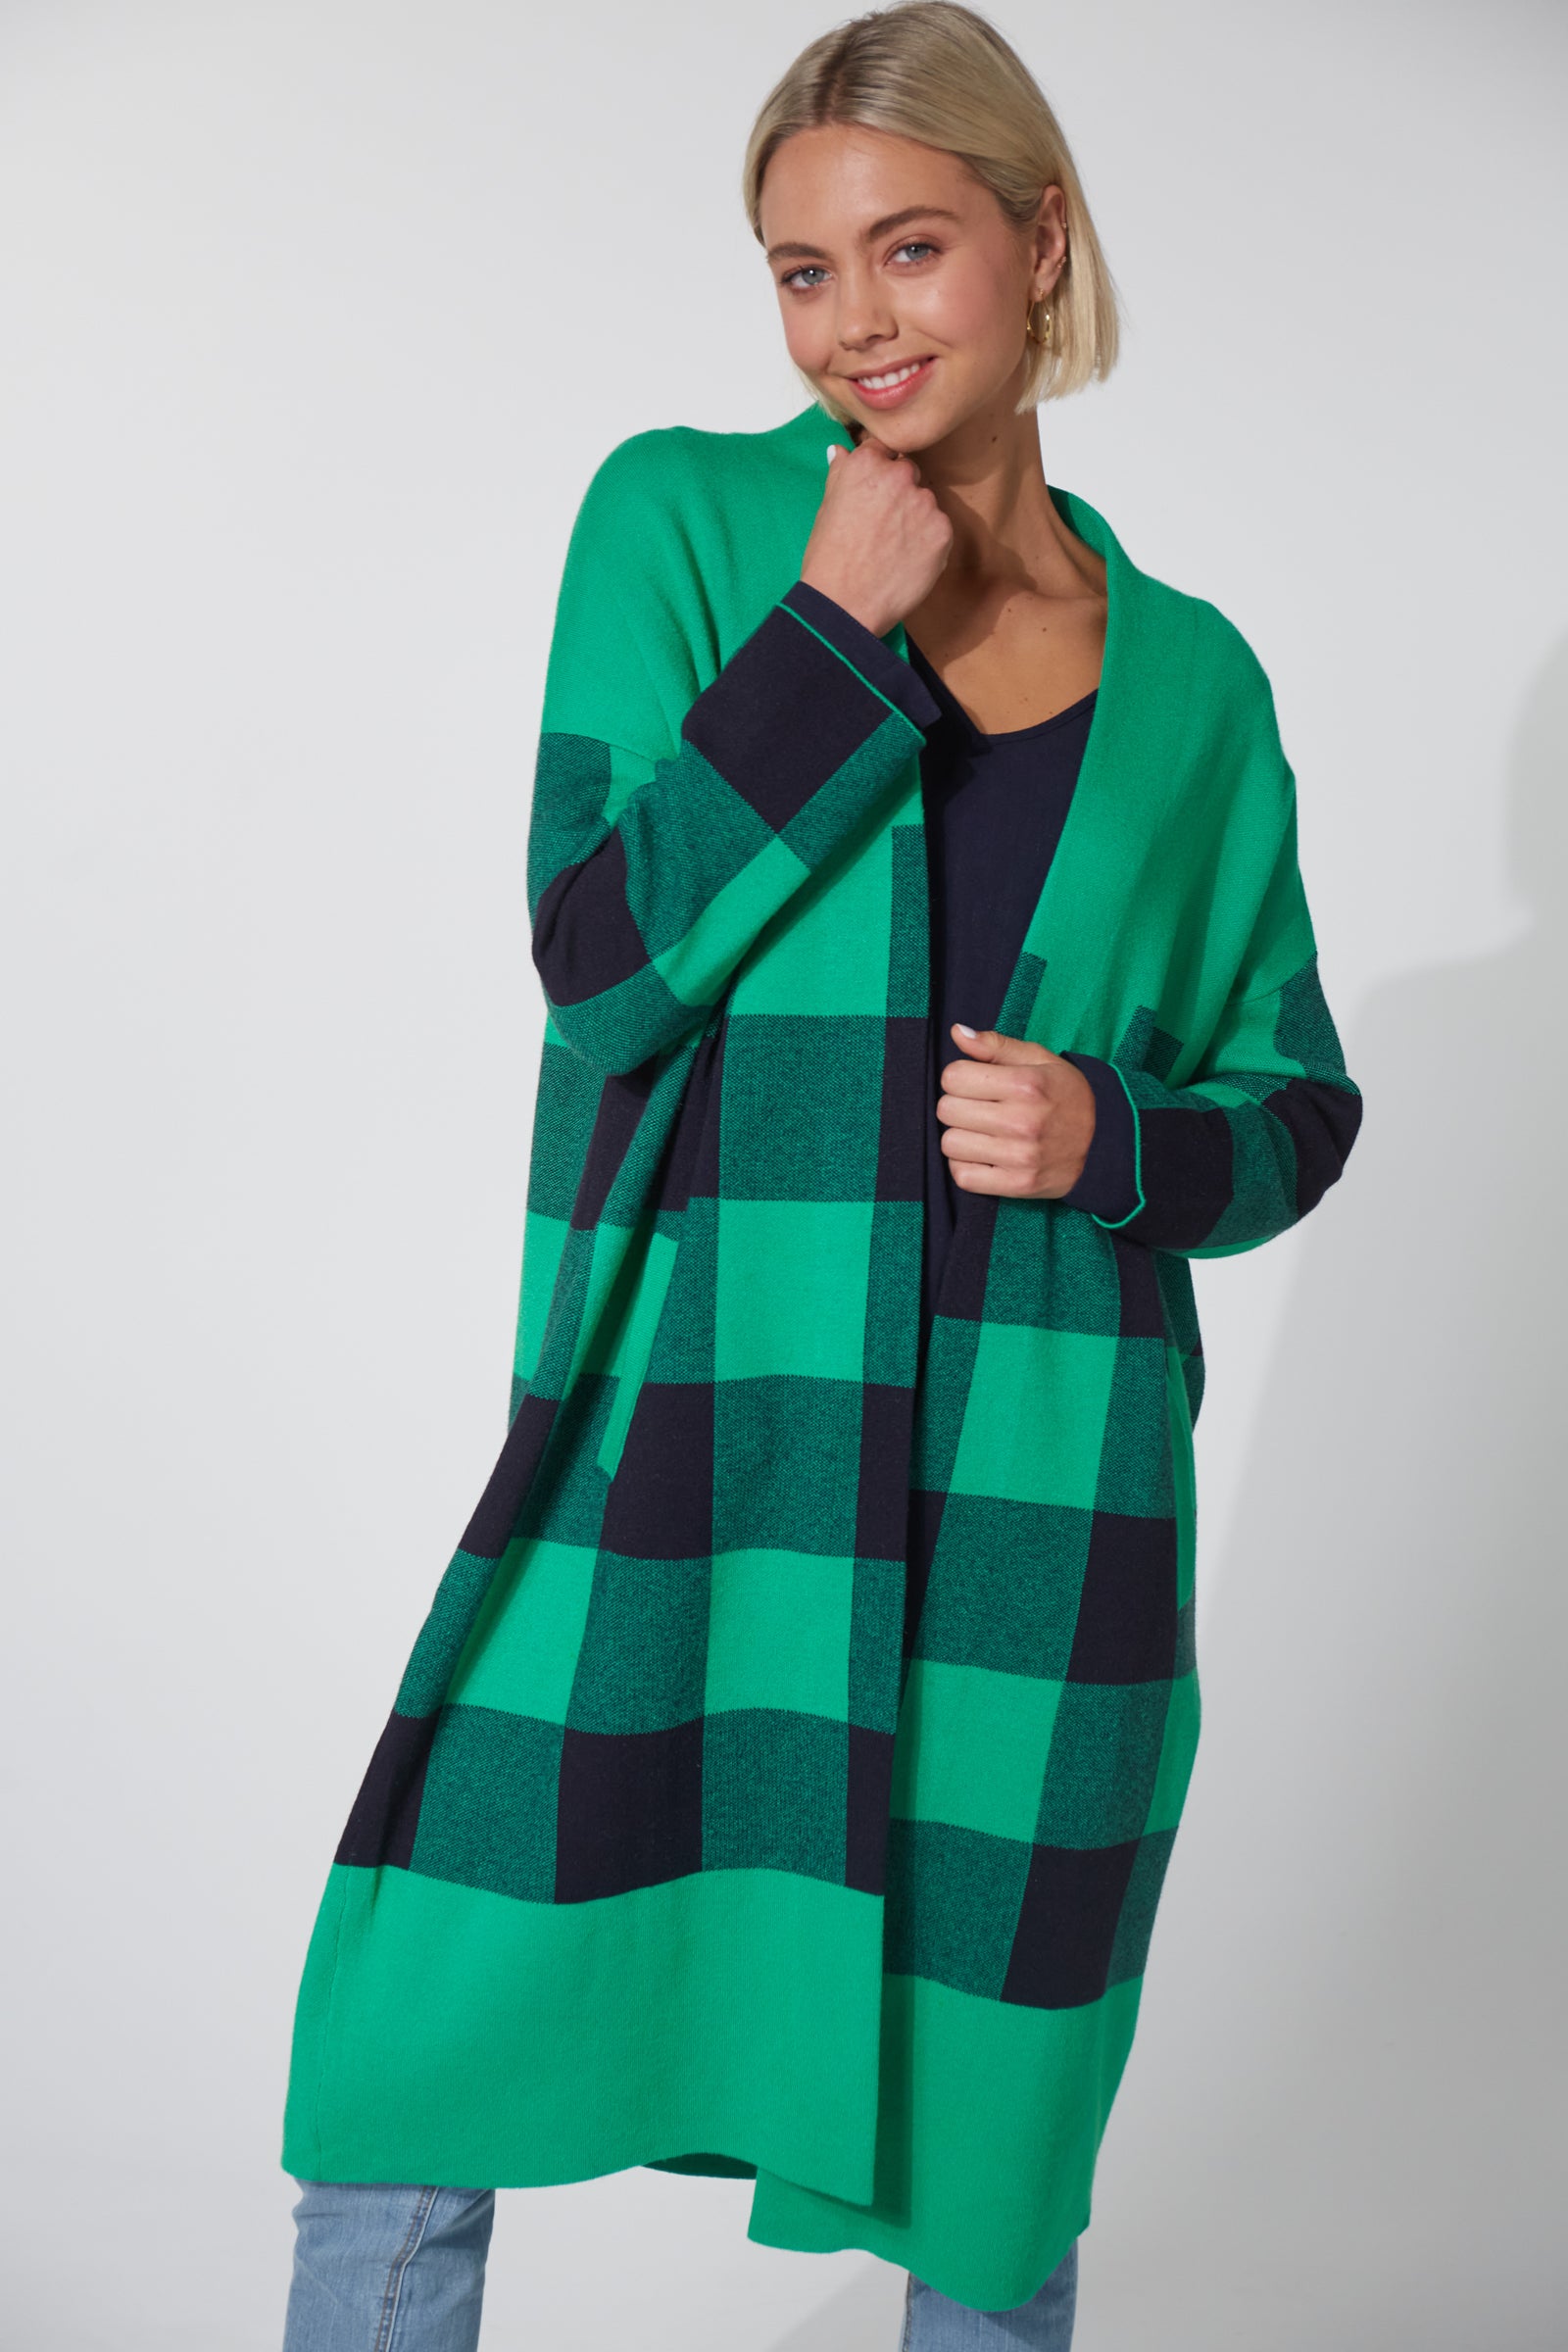 Harris One Size Cardigan in Midnight Check